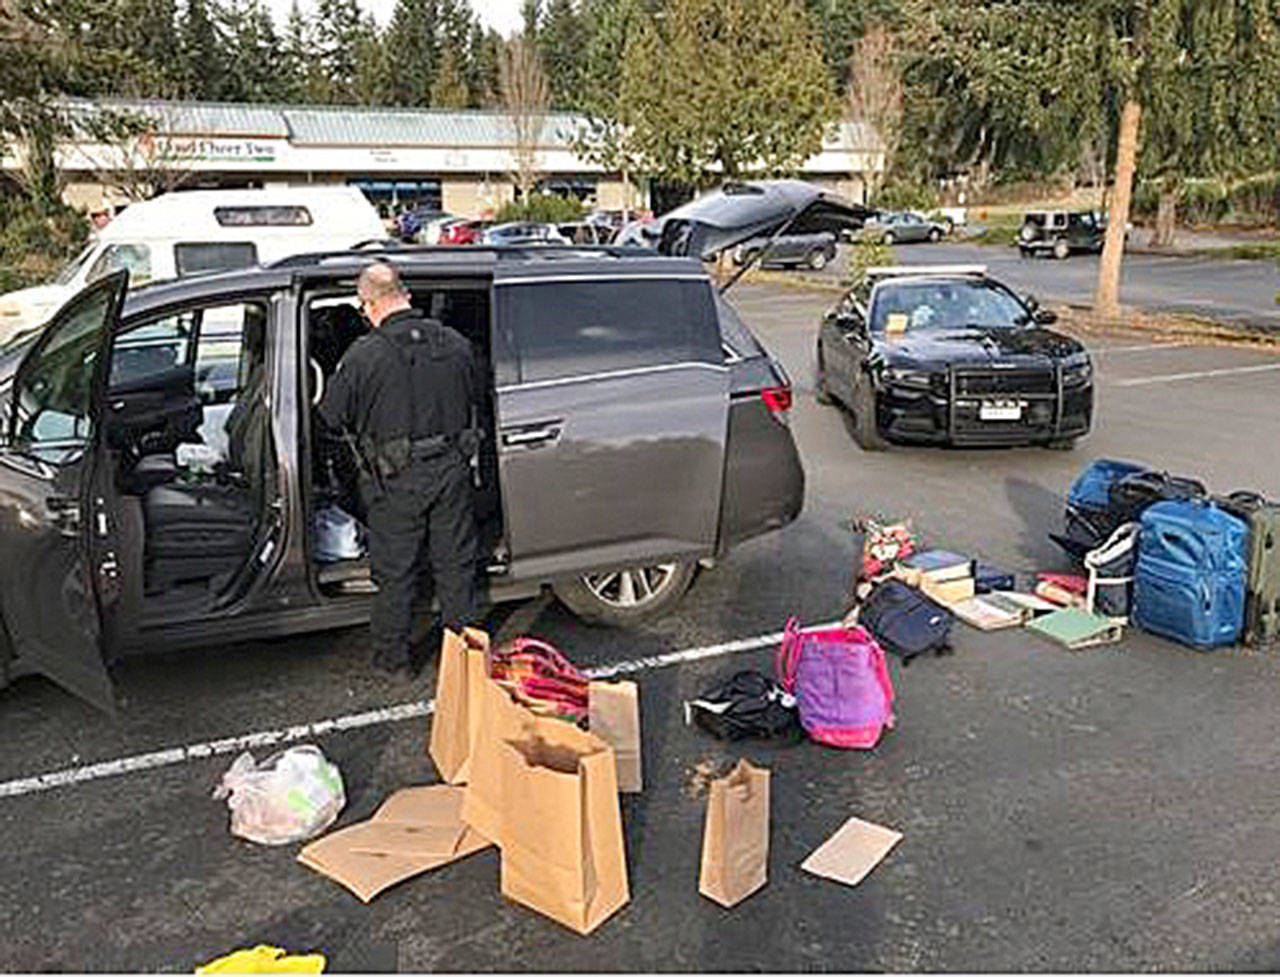 Photo provided by the sheriff’s office. Deputies searched the vehicle and found many items.